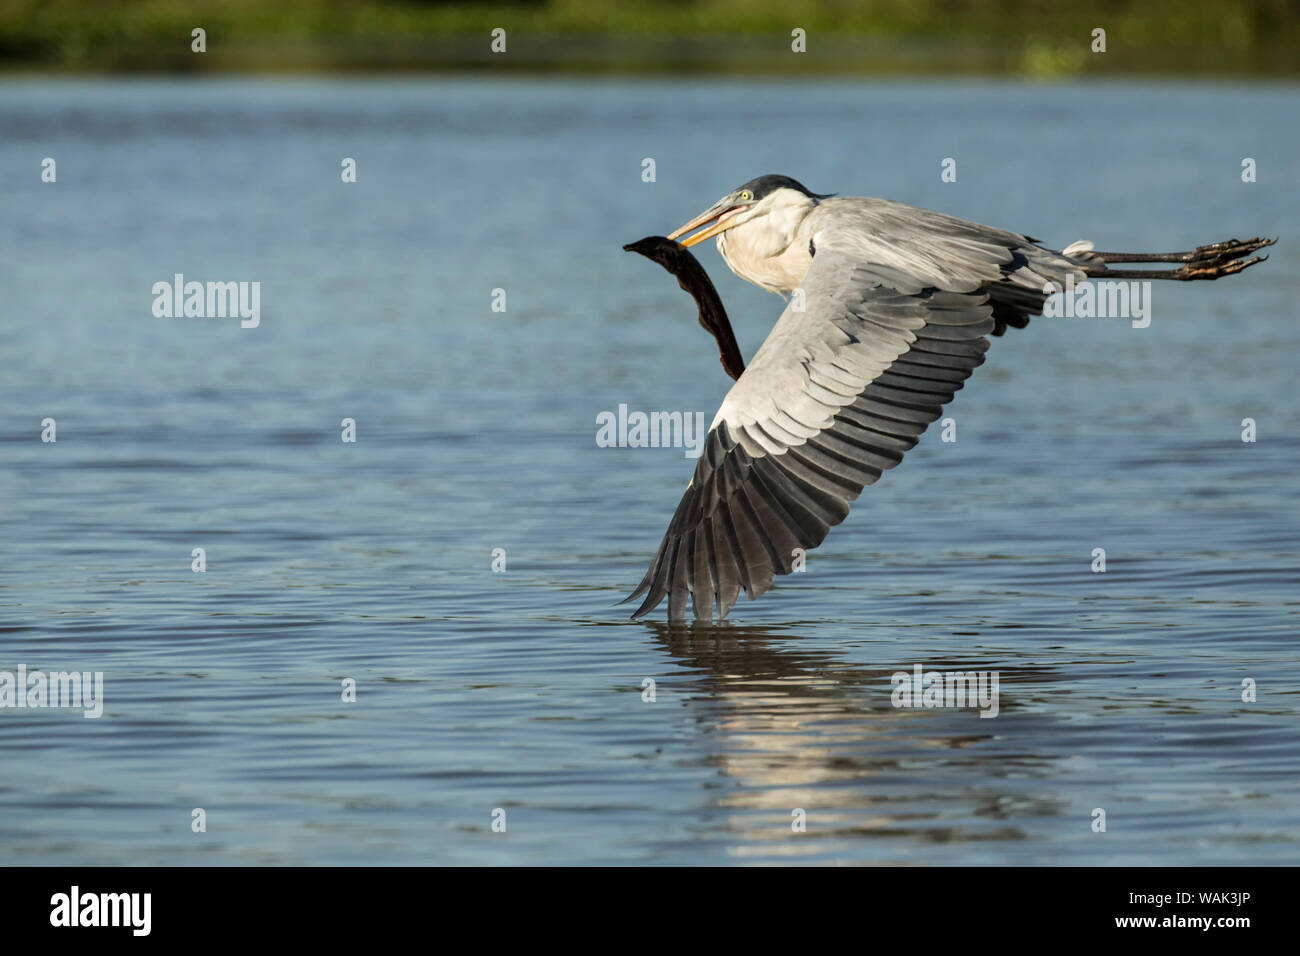 Pantanal, Mato Grosso, Brazil. Cocoi Heron flying with a freshwater eel in its mouth. Stock Photo